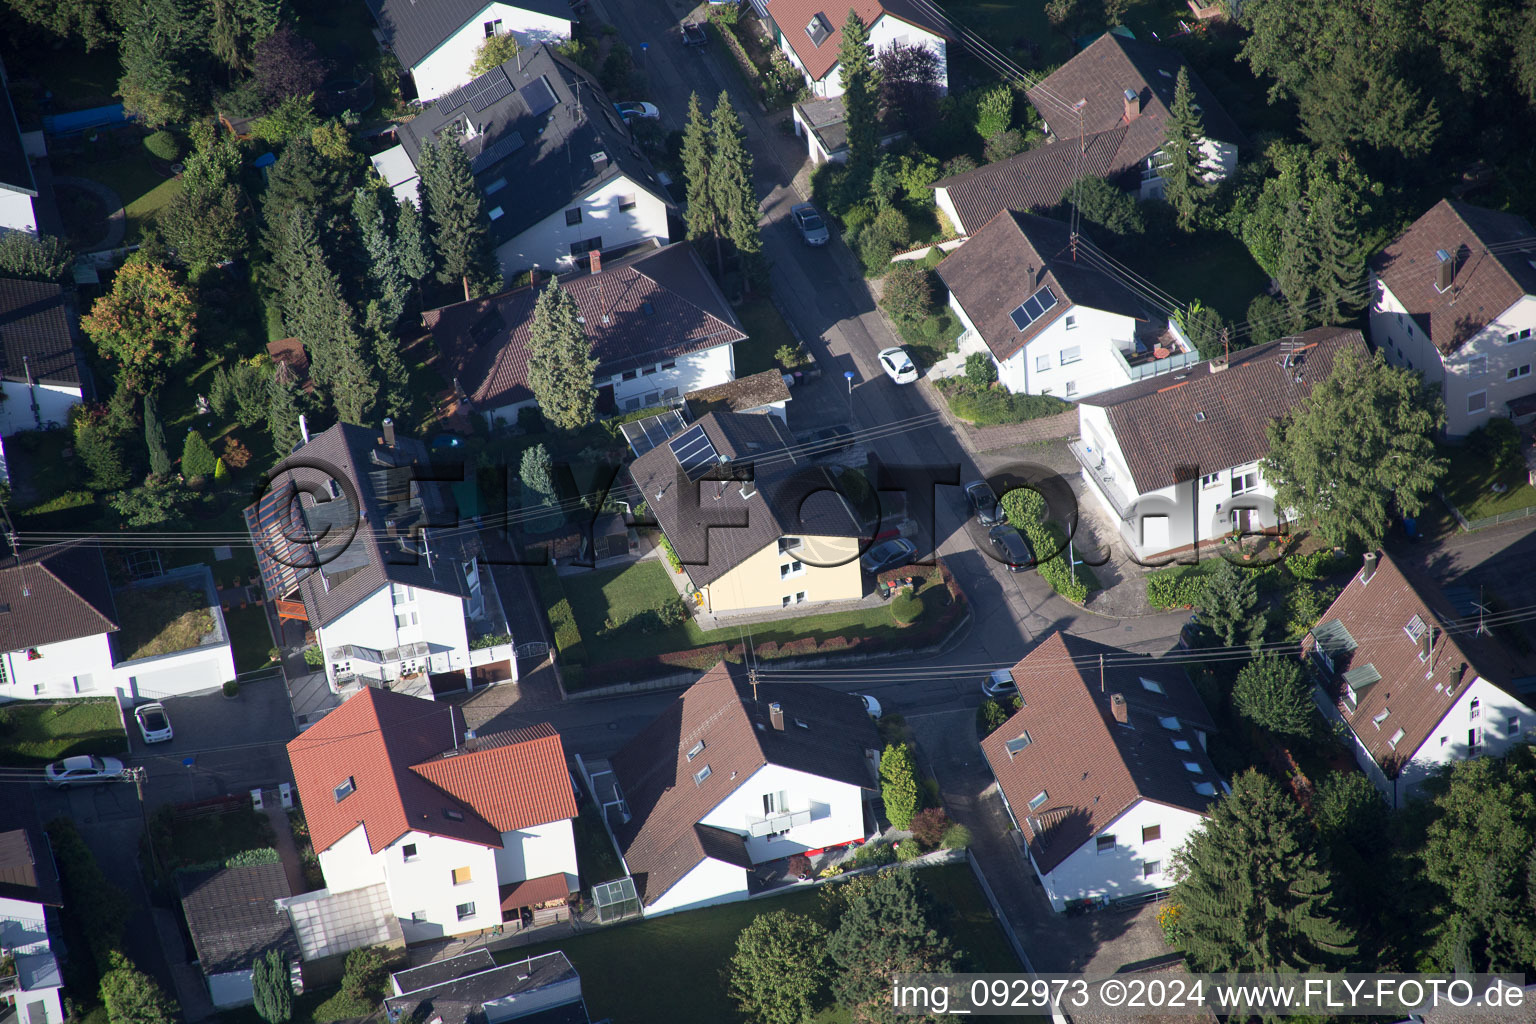 Aerial photograpy of Settlement area in the district Wolfartsweier in Karlsruhe in the state Baden-Wurttemberg, Germany